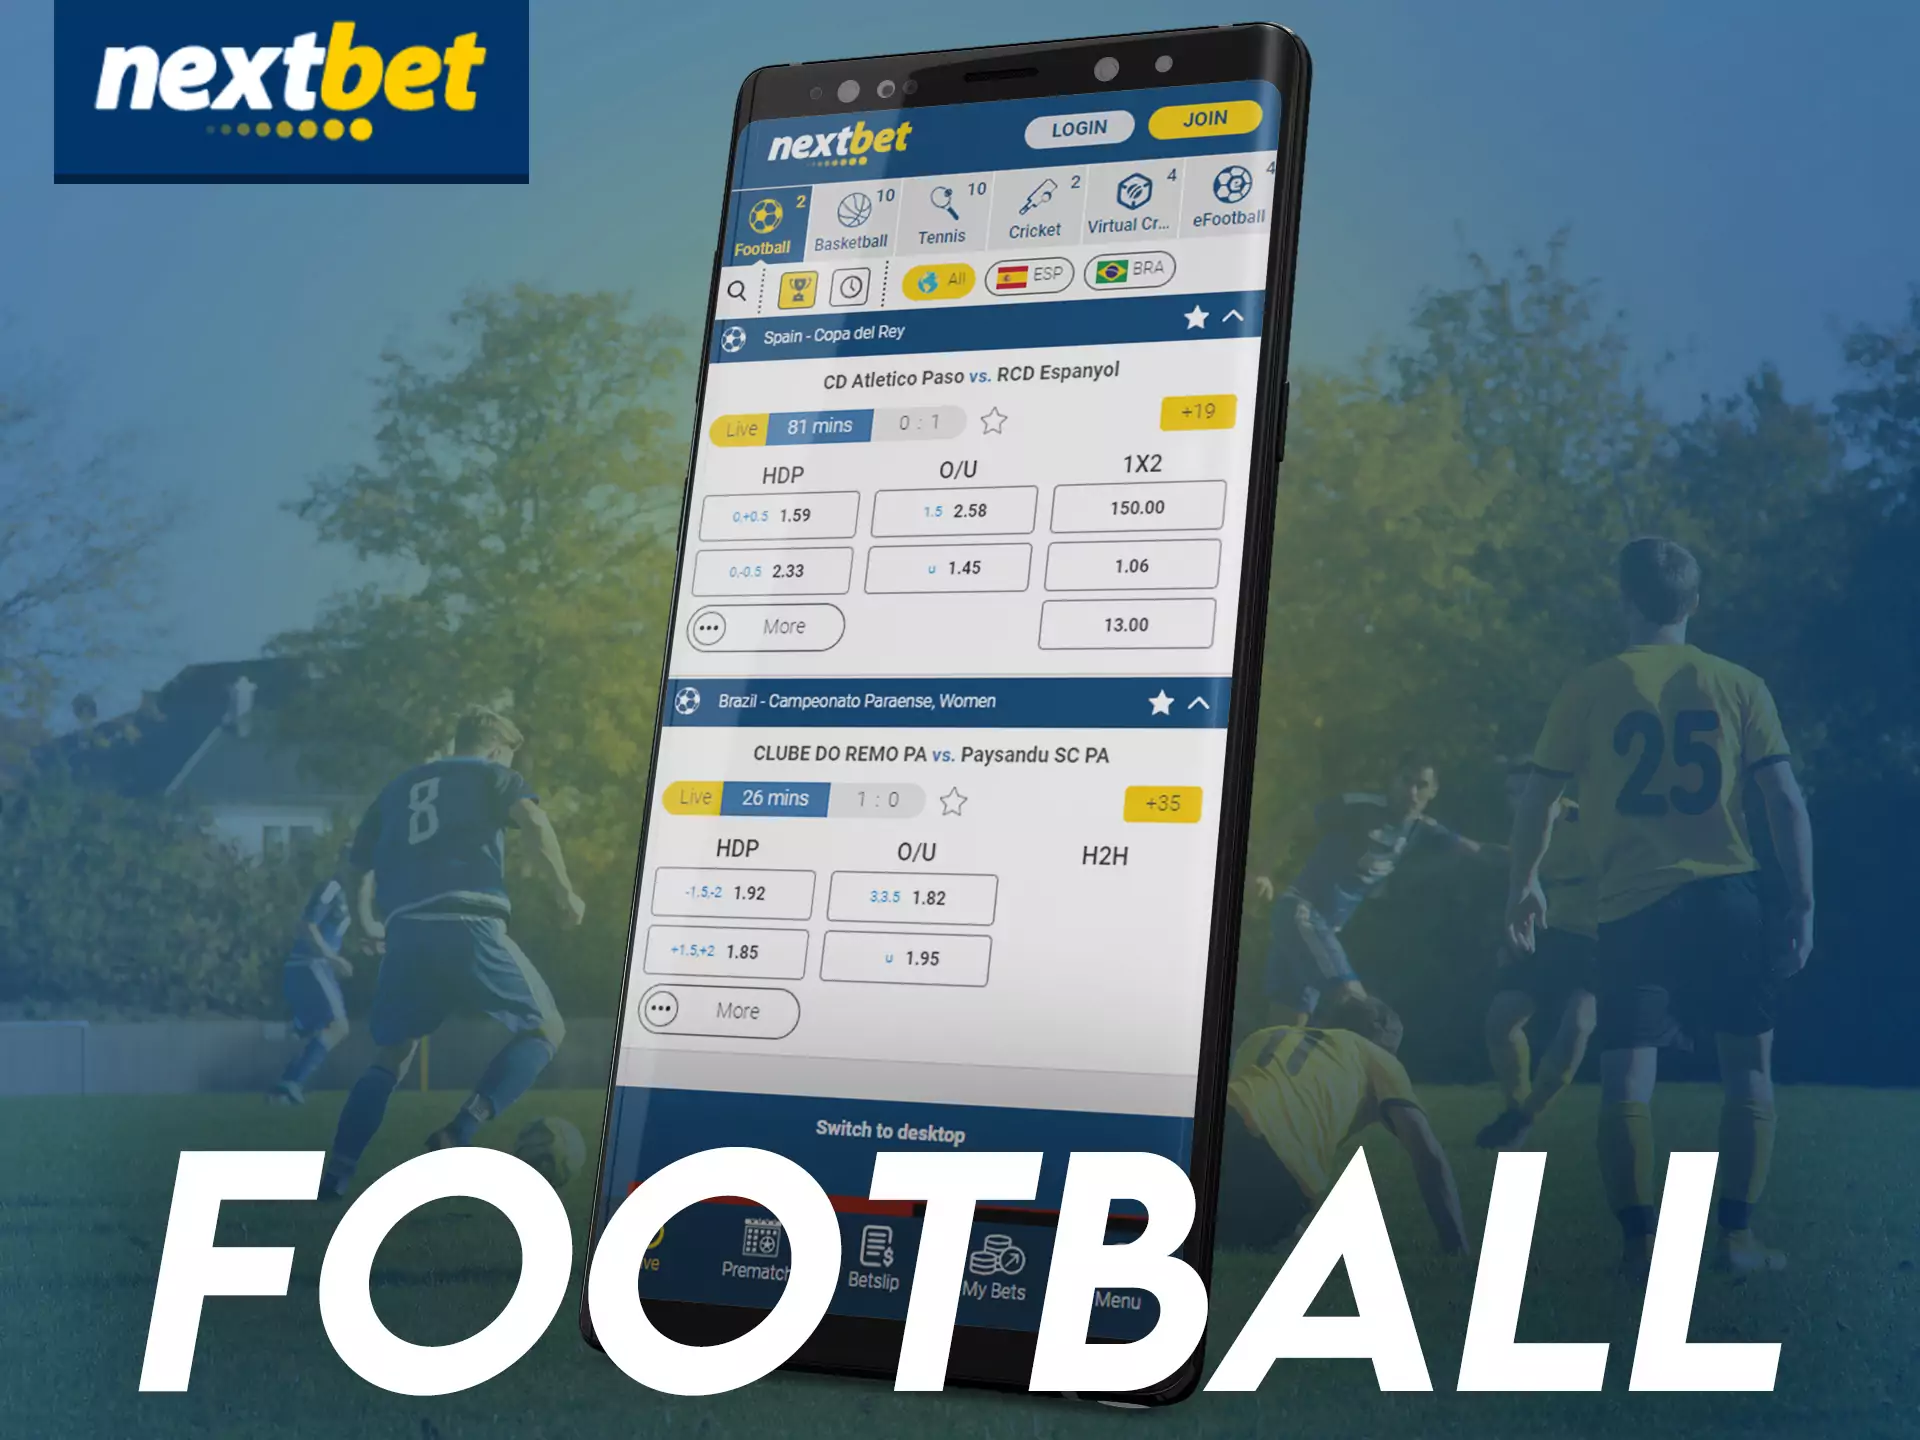 If you are a football fan, then place bets on this sport in the Nextbet app.